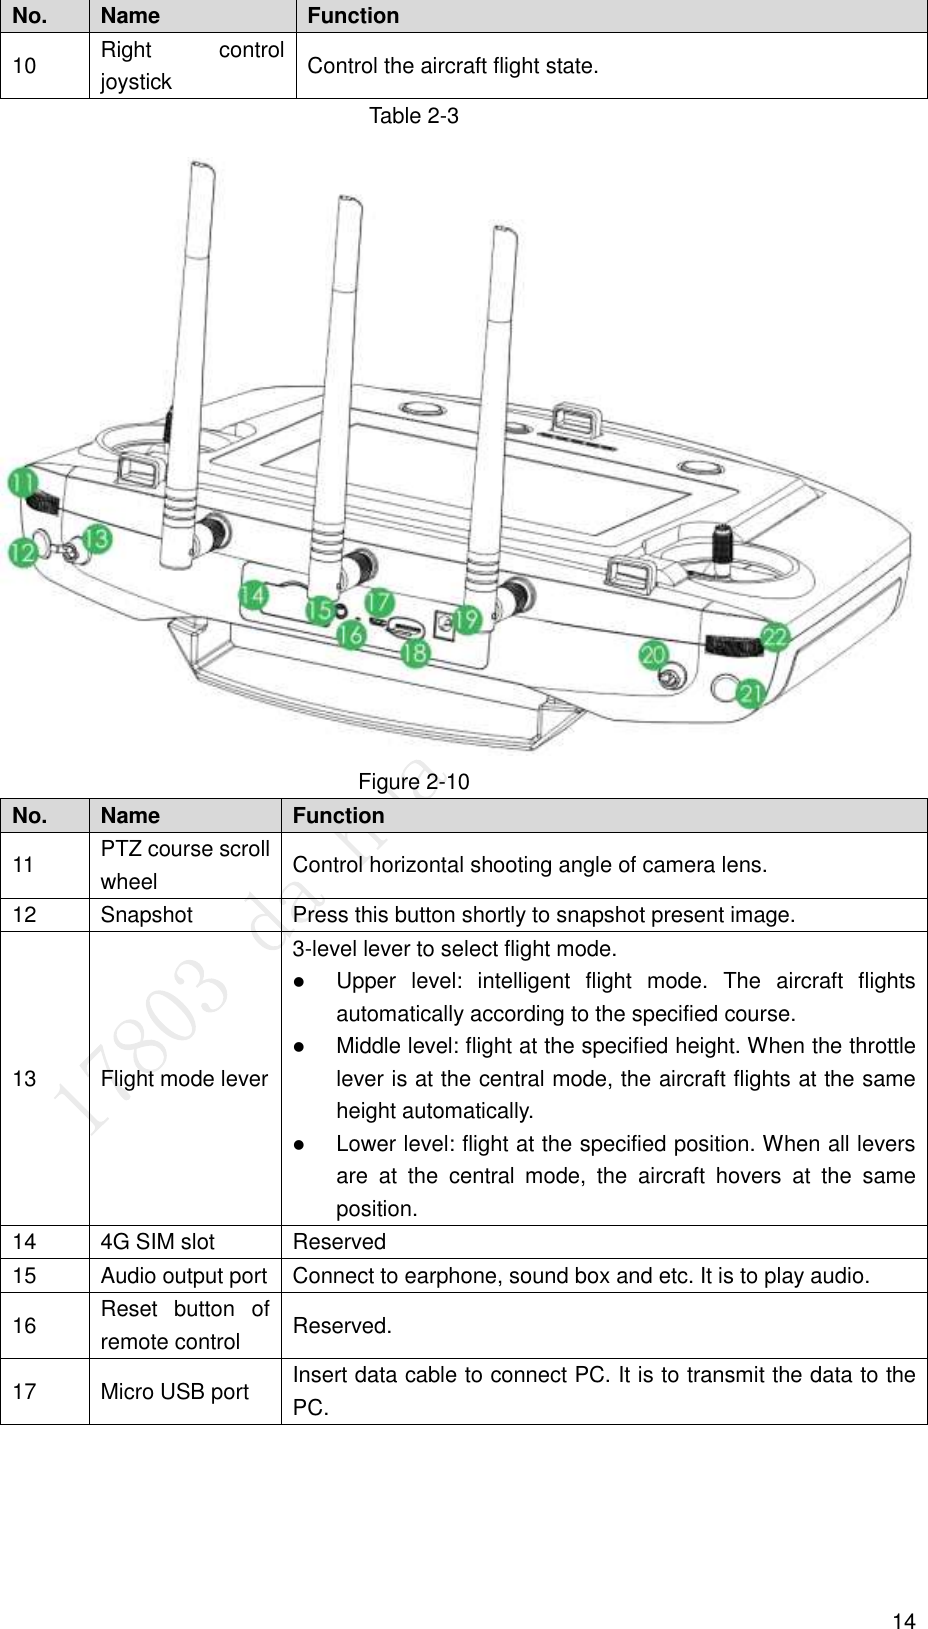  14 No. Name Function   10 Right  control joystick Control the aircraft flight state. Table 2-3  Figure 2-10 No. Name Function   11 PTZ course scroll wheel Control horizontal shooting angle of camera lens.   12 Snapshot   Press this button shortly to snapshot present image.   13 Flight mode lever 3-level lever to select flight mode.  Upper  level:  intelligent  flight  mode.  The  aircraft  flights automatically according to the specified course.    Middle level: flight at the specified height. When the throttle lever is at the central mode, the aircraft flights at the same height automatically.    Lower level: flight at the specified position. When all levers are  at  the  central  mode,  the  aircraft  hovers  at  the  same position. 14 4G SIM slot Reserved 15 Audio output port Connect to earphone, sound box and etc. It is to play audio.   16 Reset  button  of remote control   Reserved.   17 Micro USB port Insert data cable to connect PC. It is to transmit the data to the PC. 